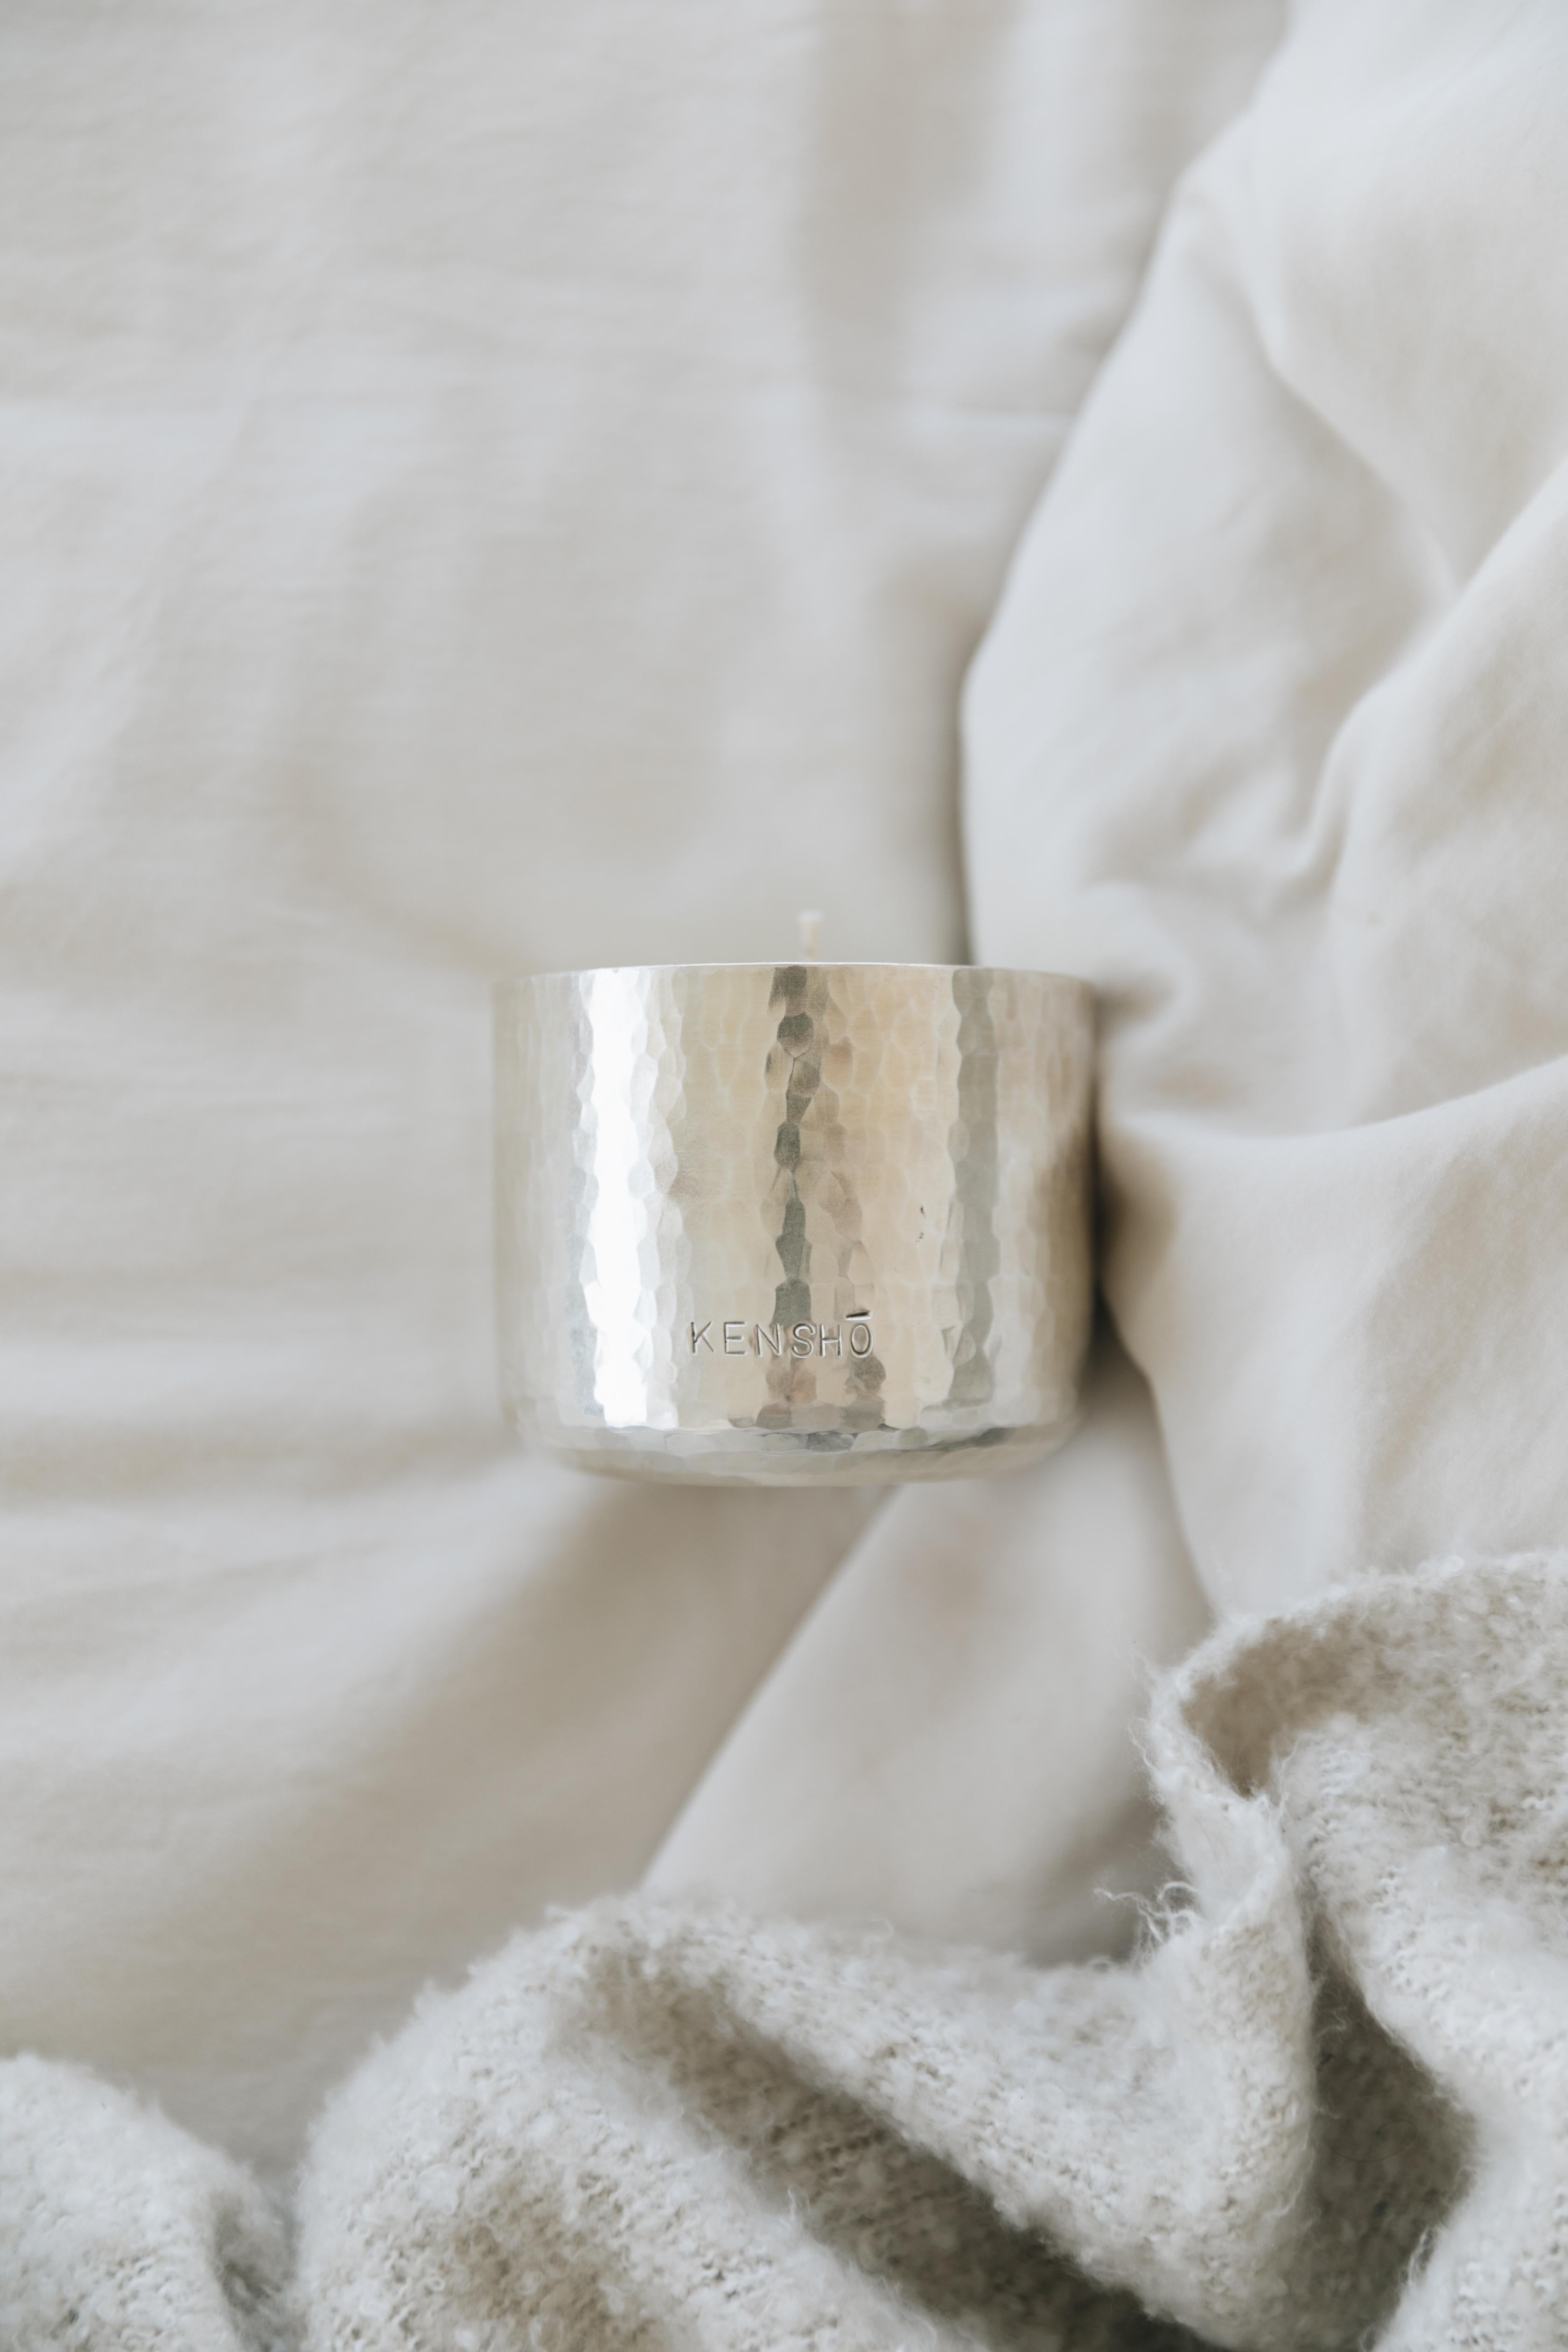 This stunning soy wax candle, crafted by skilled Mexican artisans, is a true work of art. The vase is made of hand-hammered copper with tin which gives it this silver color. It has an earthy, natural feel that fits perfectly with any home decor.